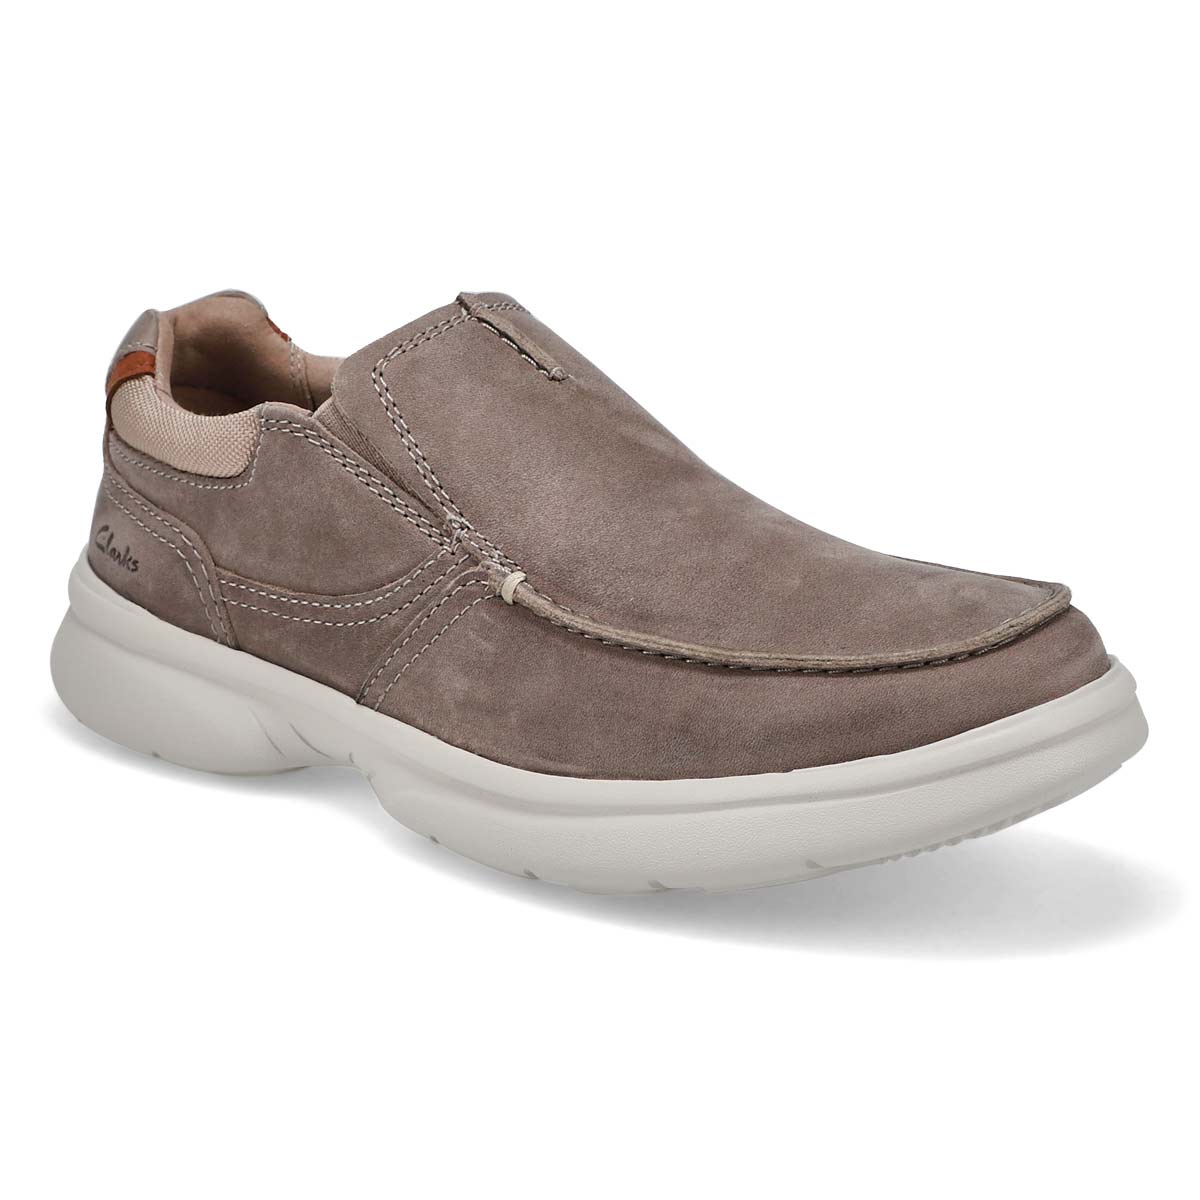 Clarks Men's Bradley Free Casual Wide Loafer | SoftMoc.com